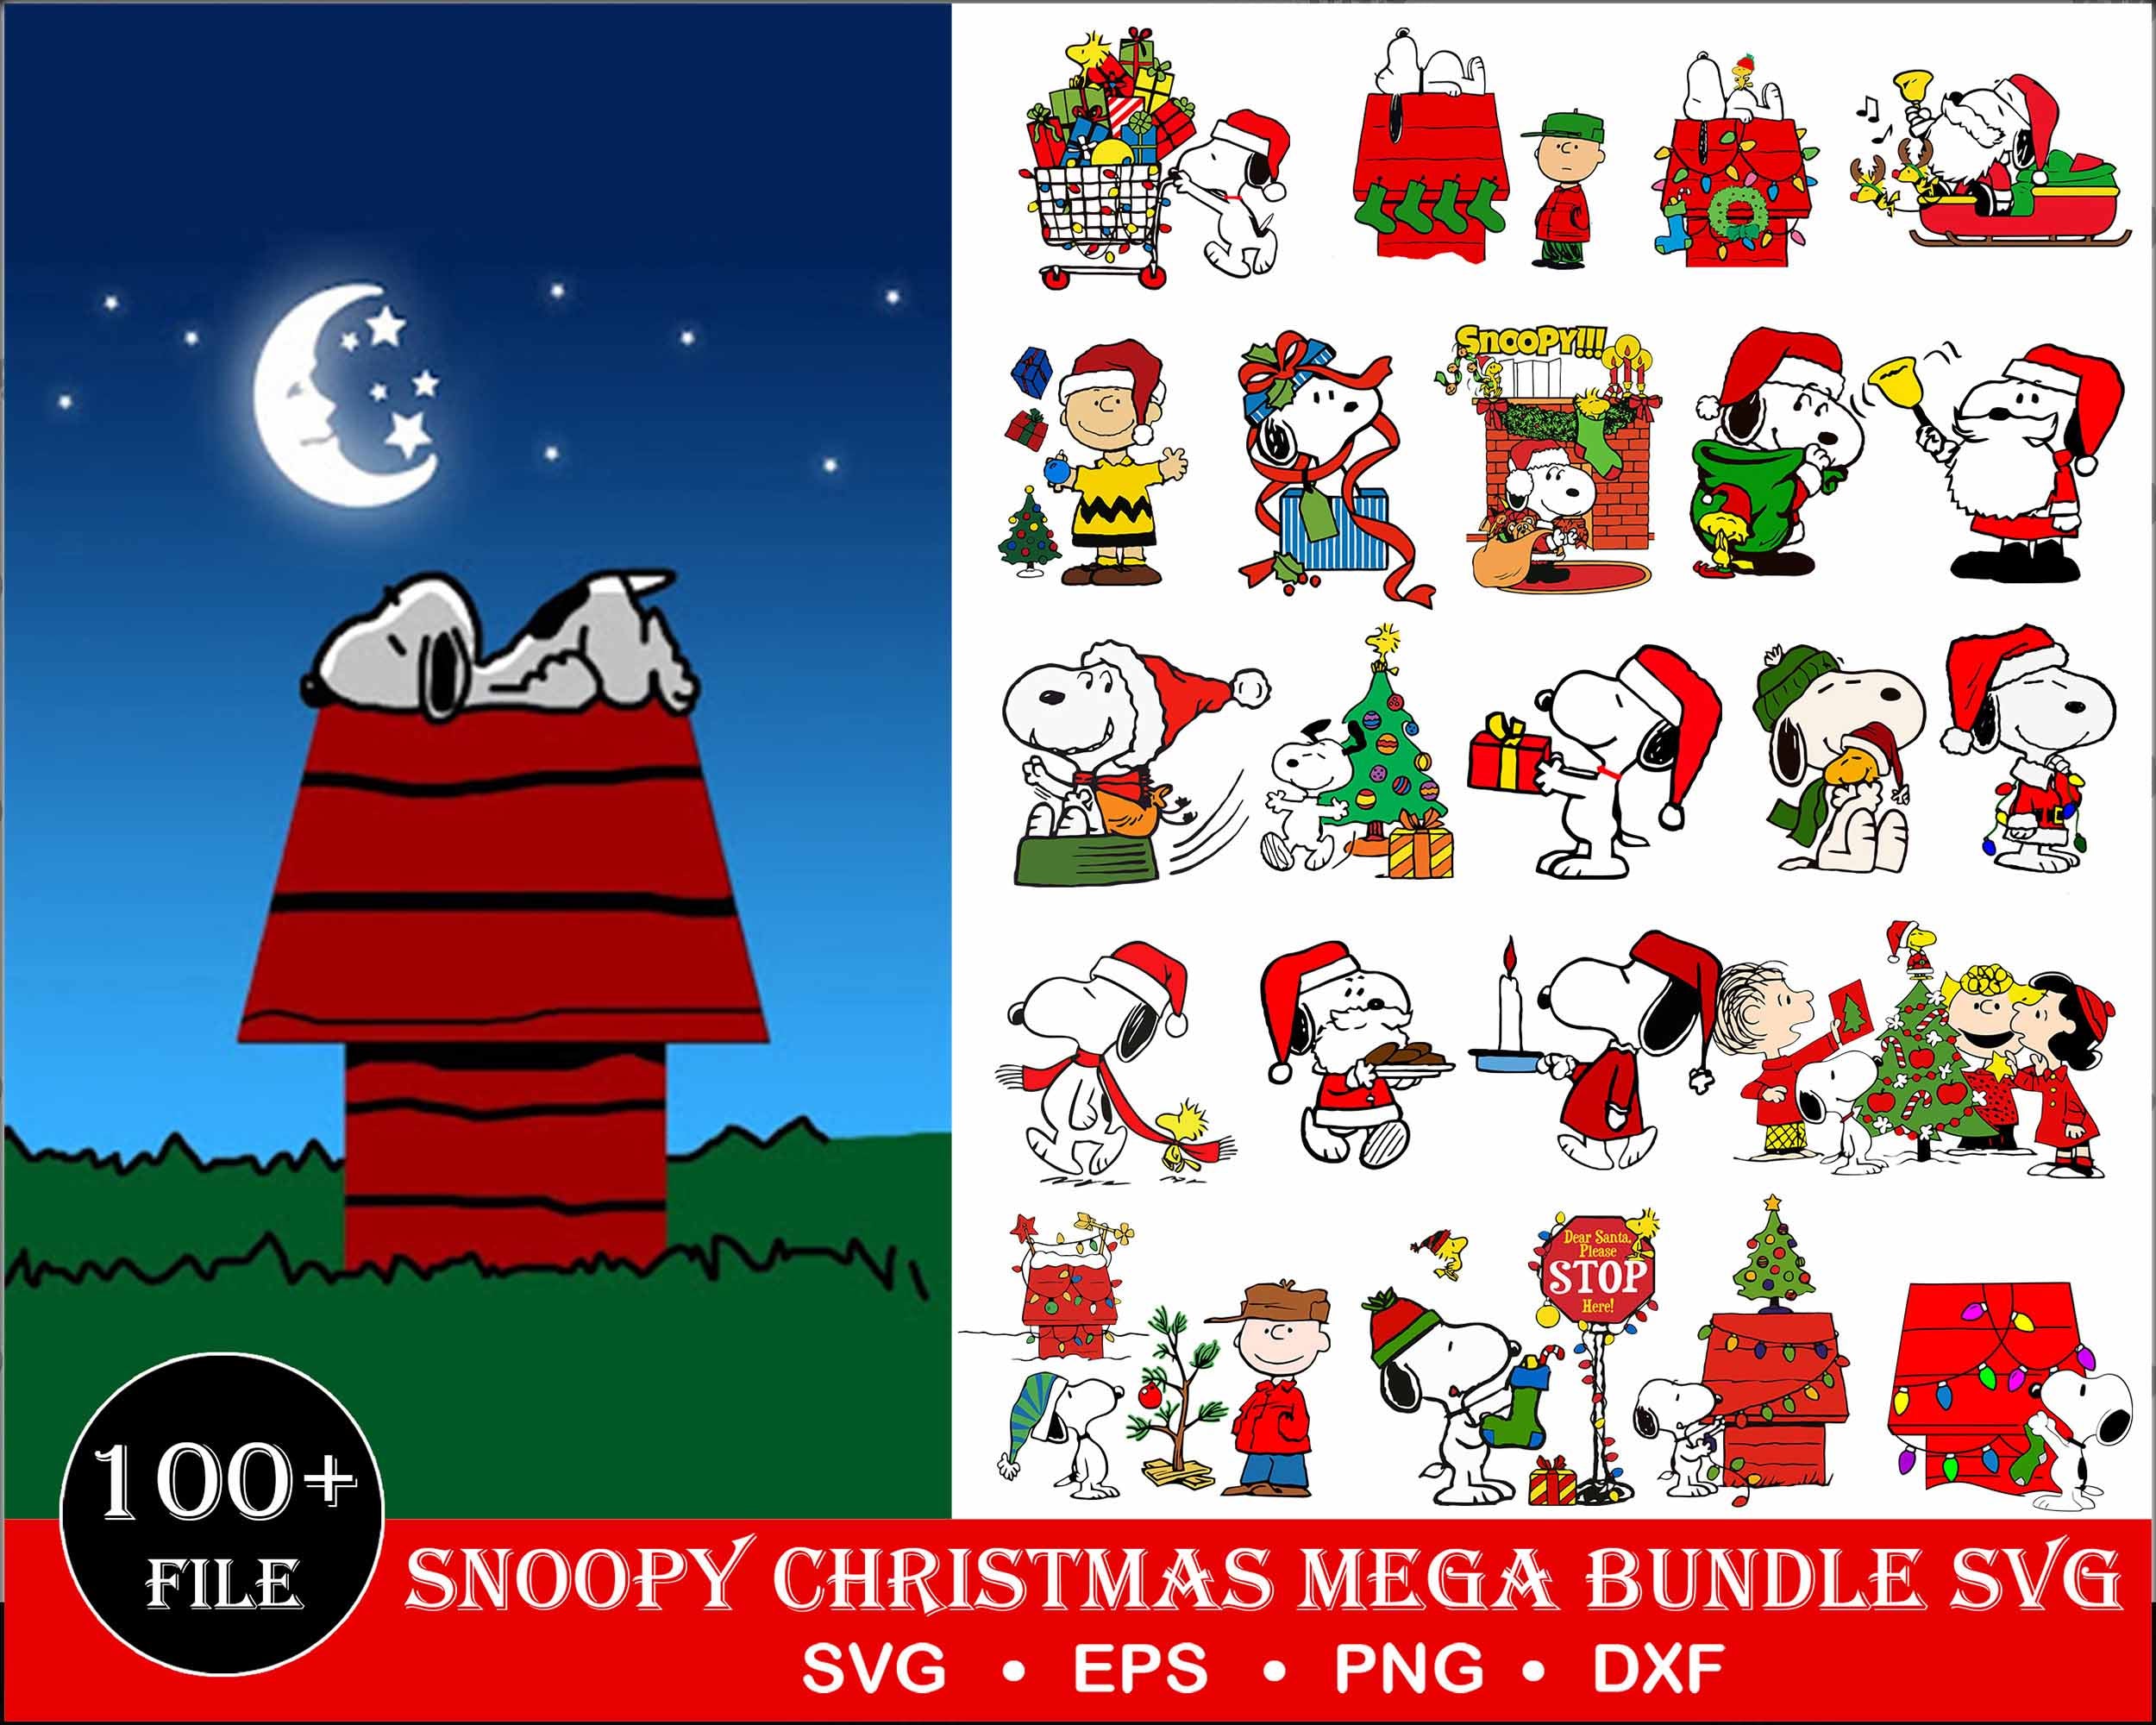 Snoopy Christmas Svg Bundle, Christmas svg, Charlie Brow svg, Snoopy Characters svg, Snoopy svg png dxf Instant Download